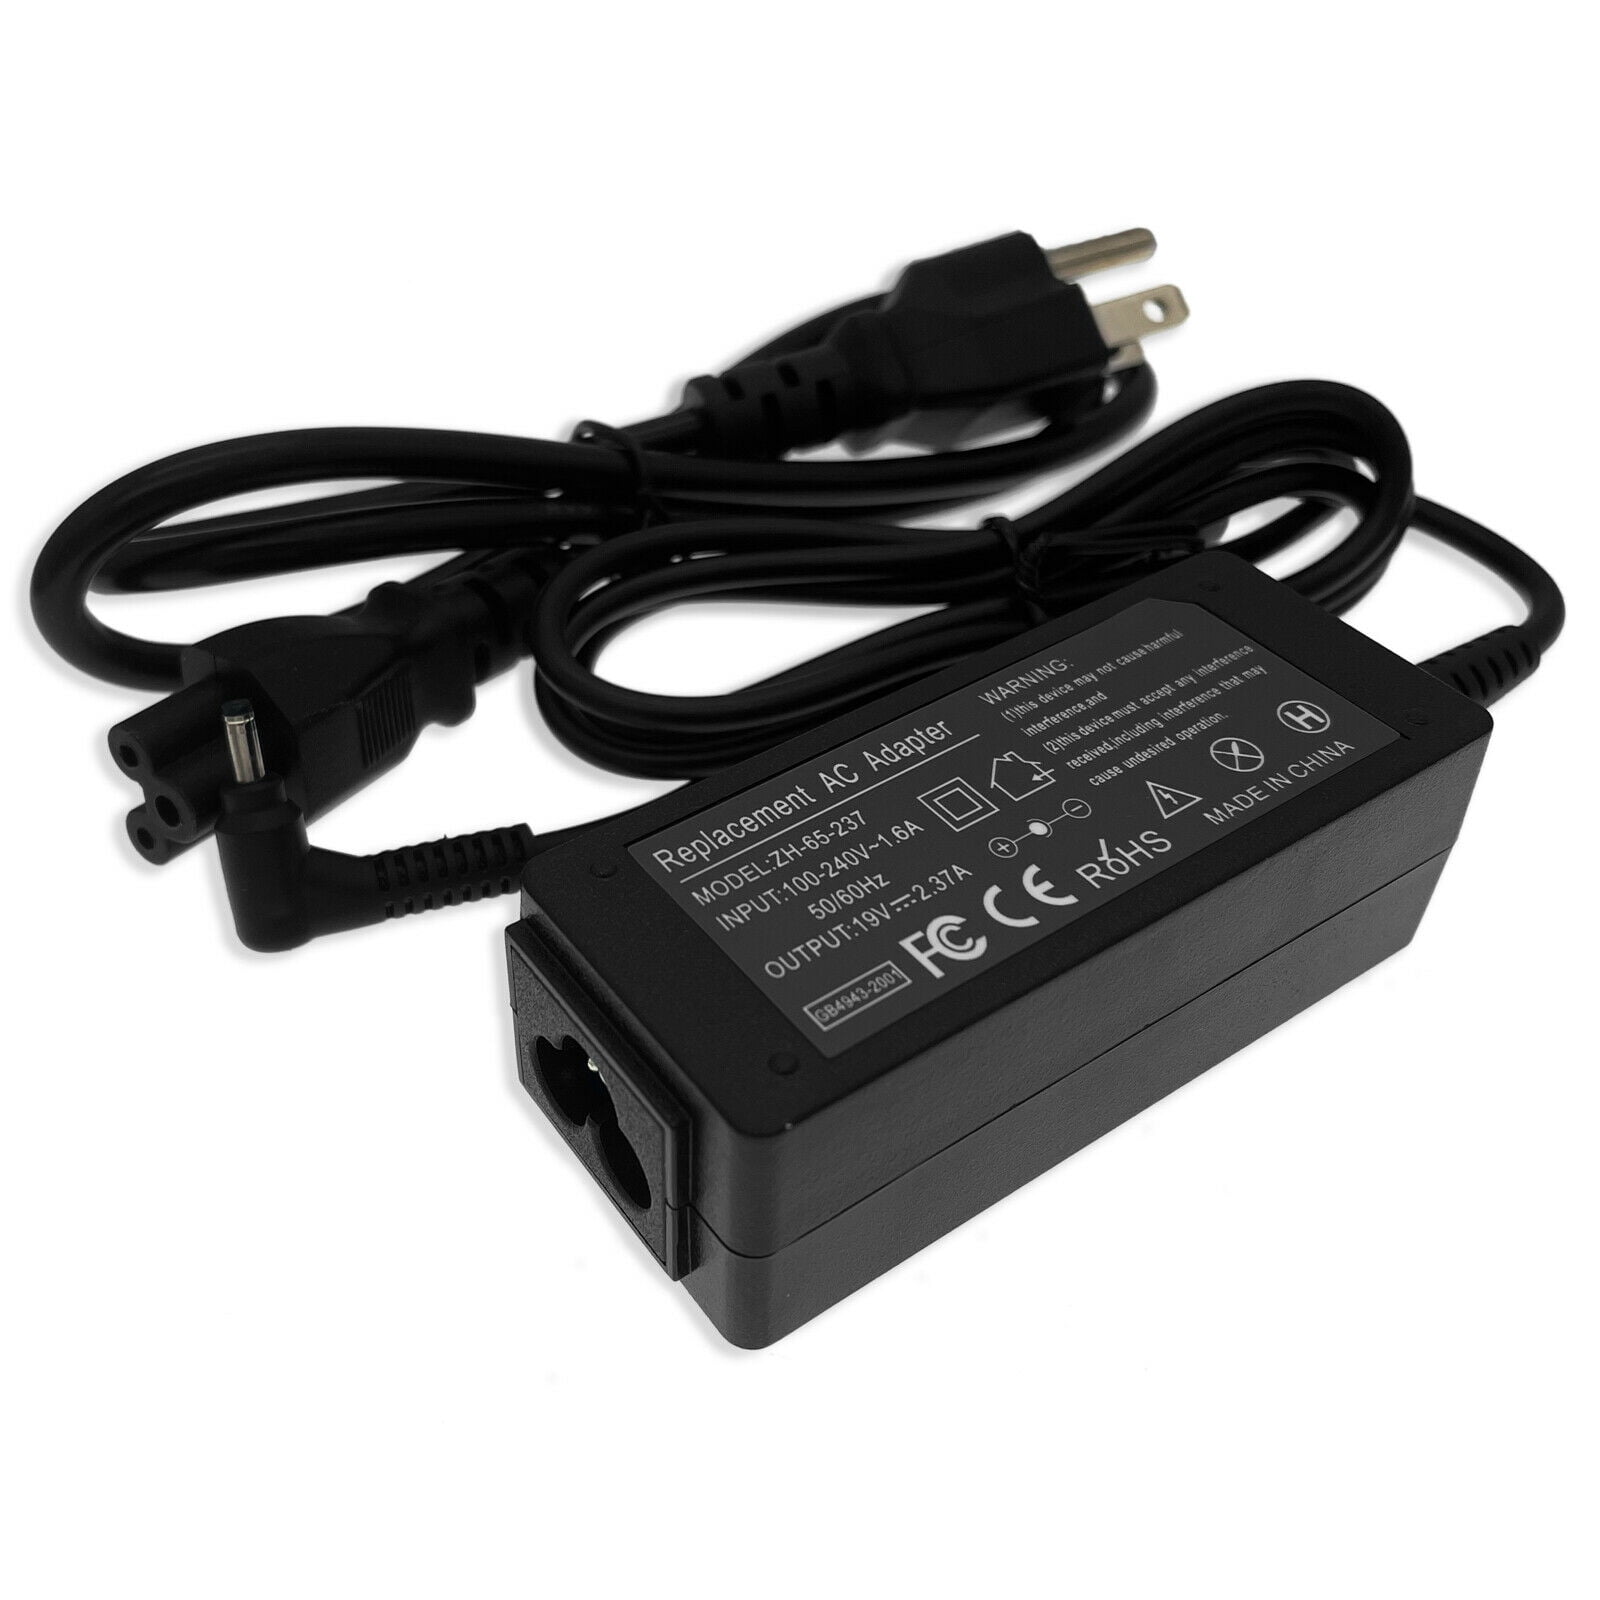 AC Adapter Charger for Acer Chromebook ASC720 15 N15Q9 N5Q9 Power 